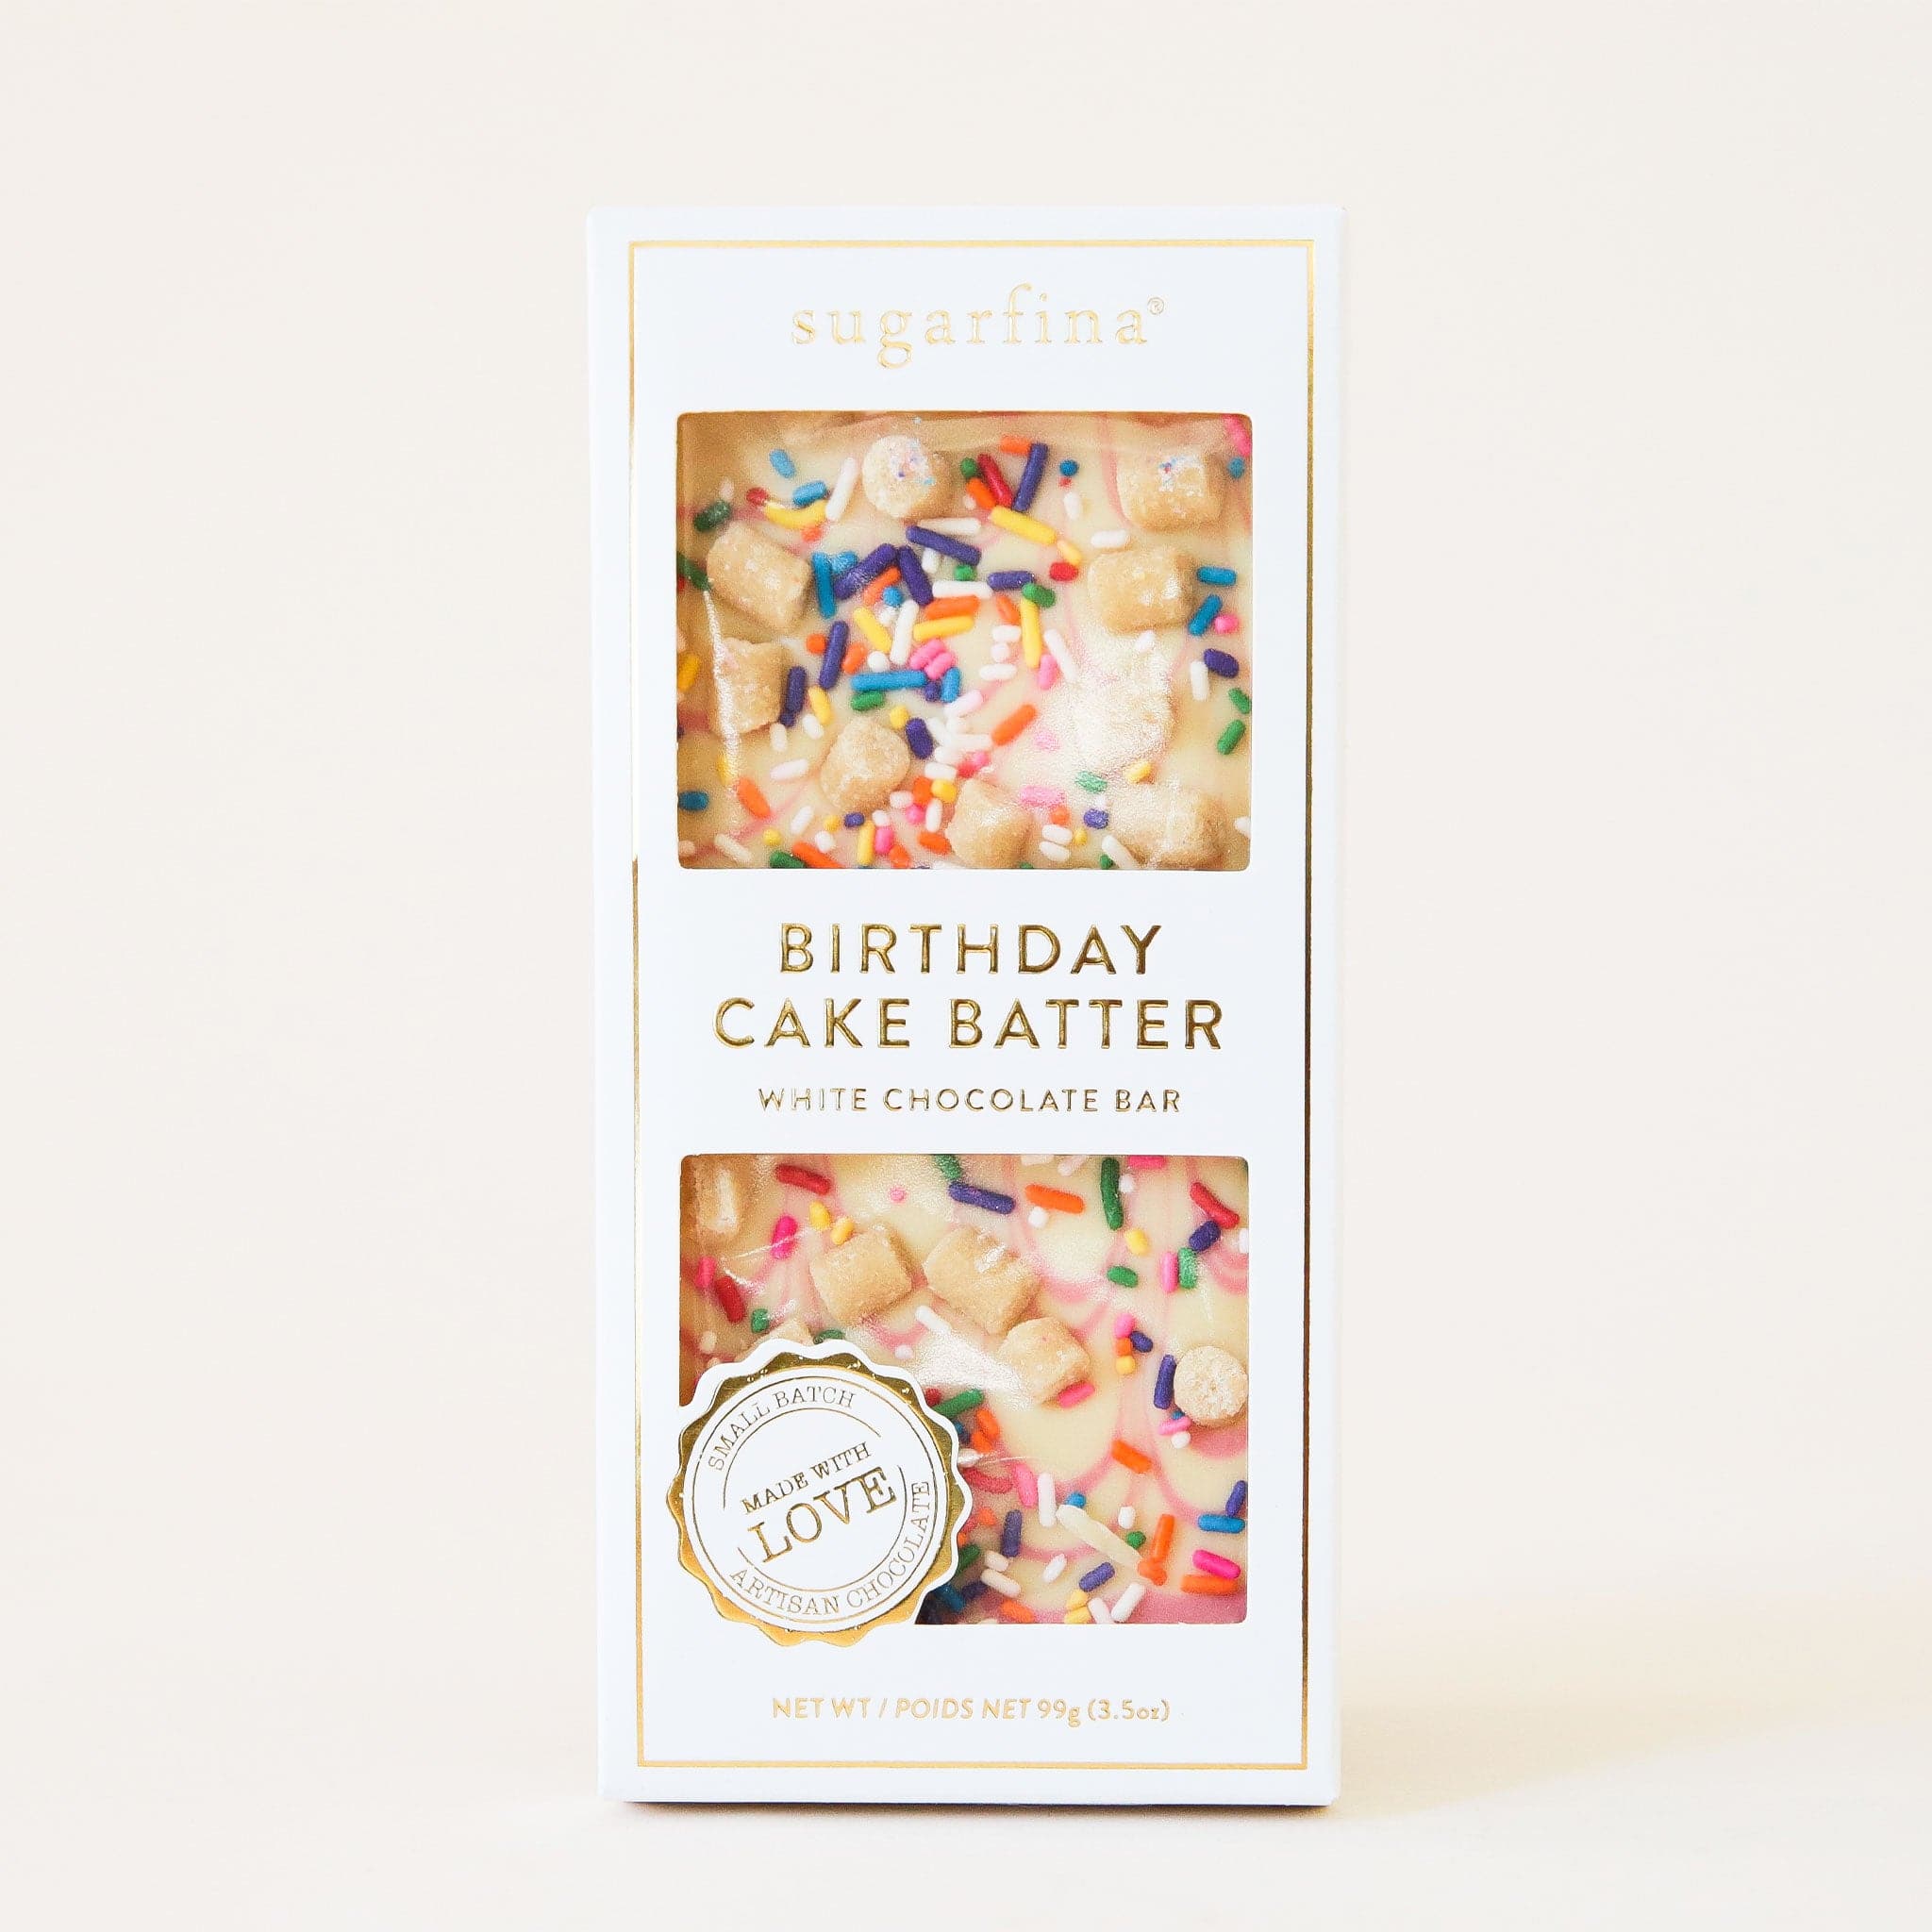 White chocolate bar covered in chunks of cookie dough and rainbow sprinkles. The bar  has white packaging accented with gold foil detailing that reads 'Birthday Cake Batter White Chocolate Bar'.